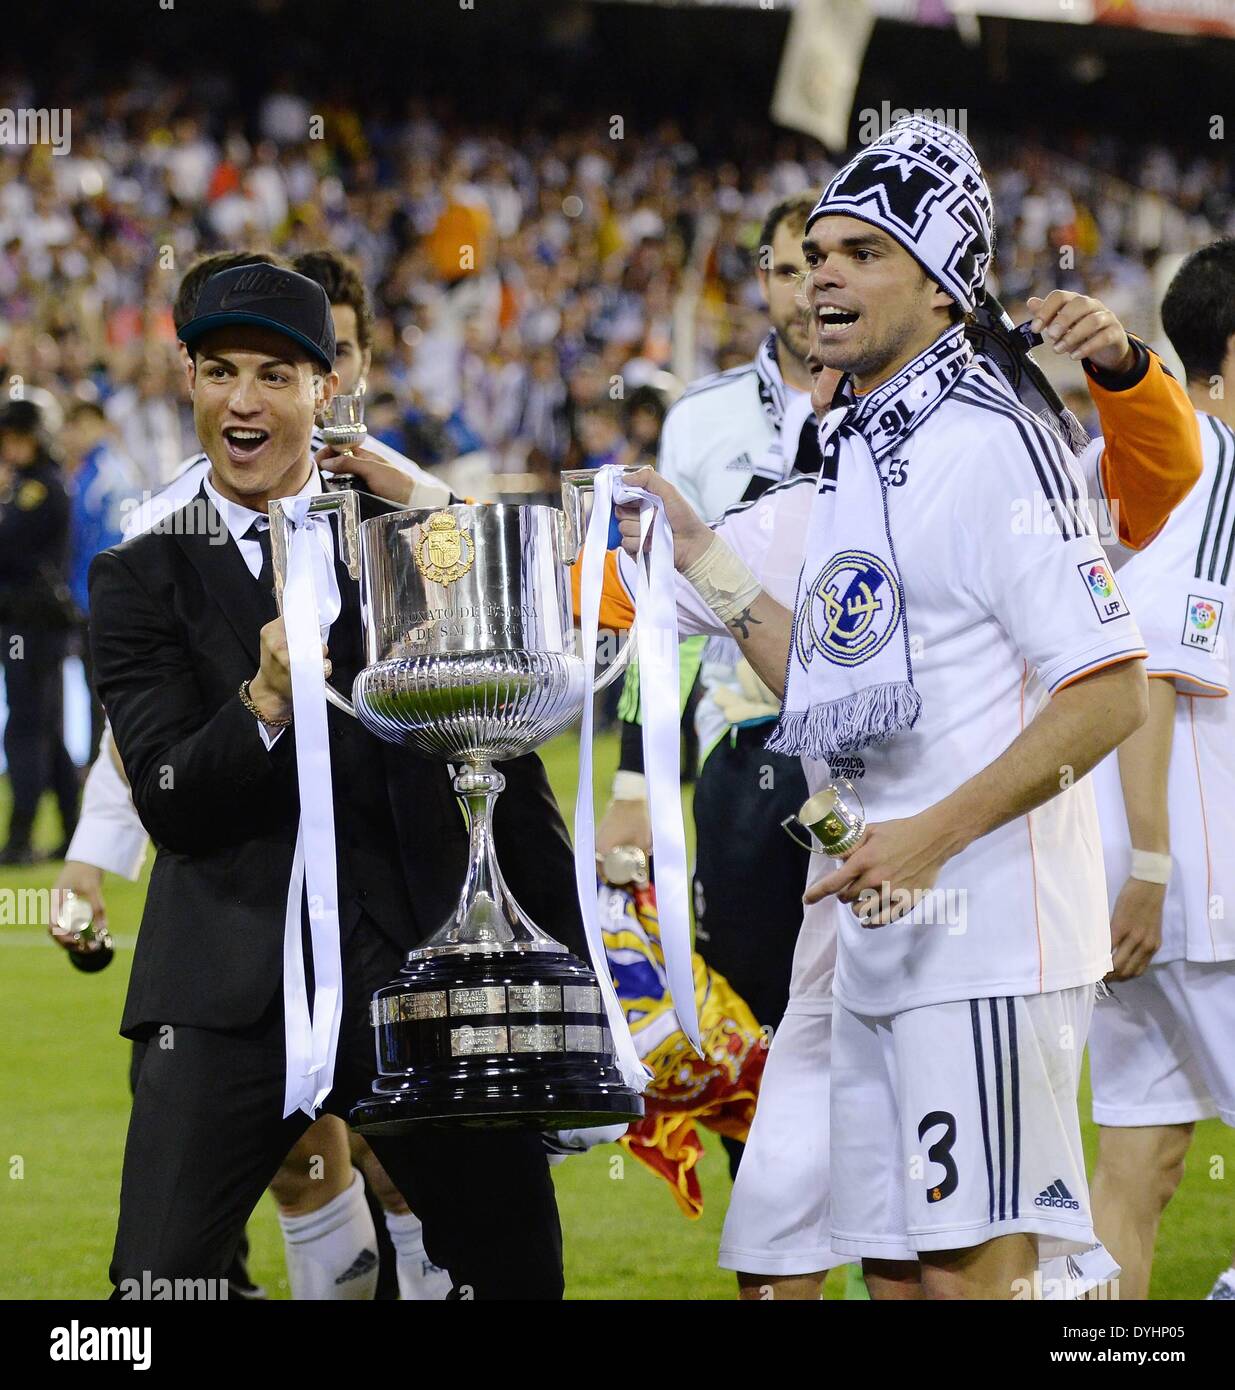 Mestalla, Valencia, Spain. 16th Apr, 2014. Copa Del Rey Cup final. Barcelona versus Real Madrid. Cristiano Ronaldo (li) and Pepe with the cup © Action Plus Sports/Alamy Live News Stock Photo